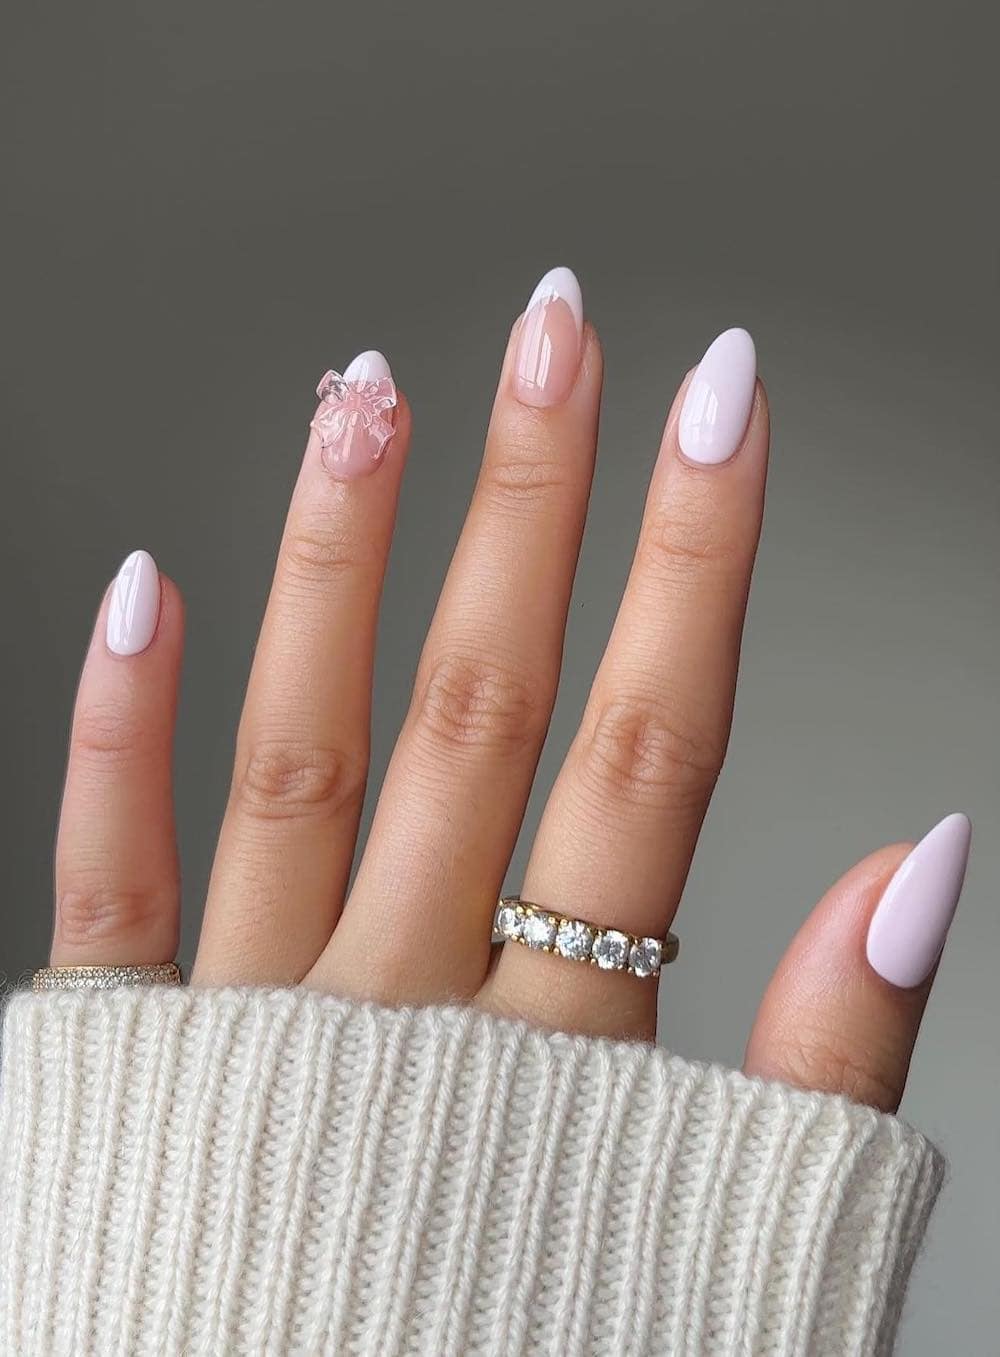 A hand with short almond nails painted a light pink with a sheer pink bow charm